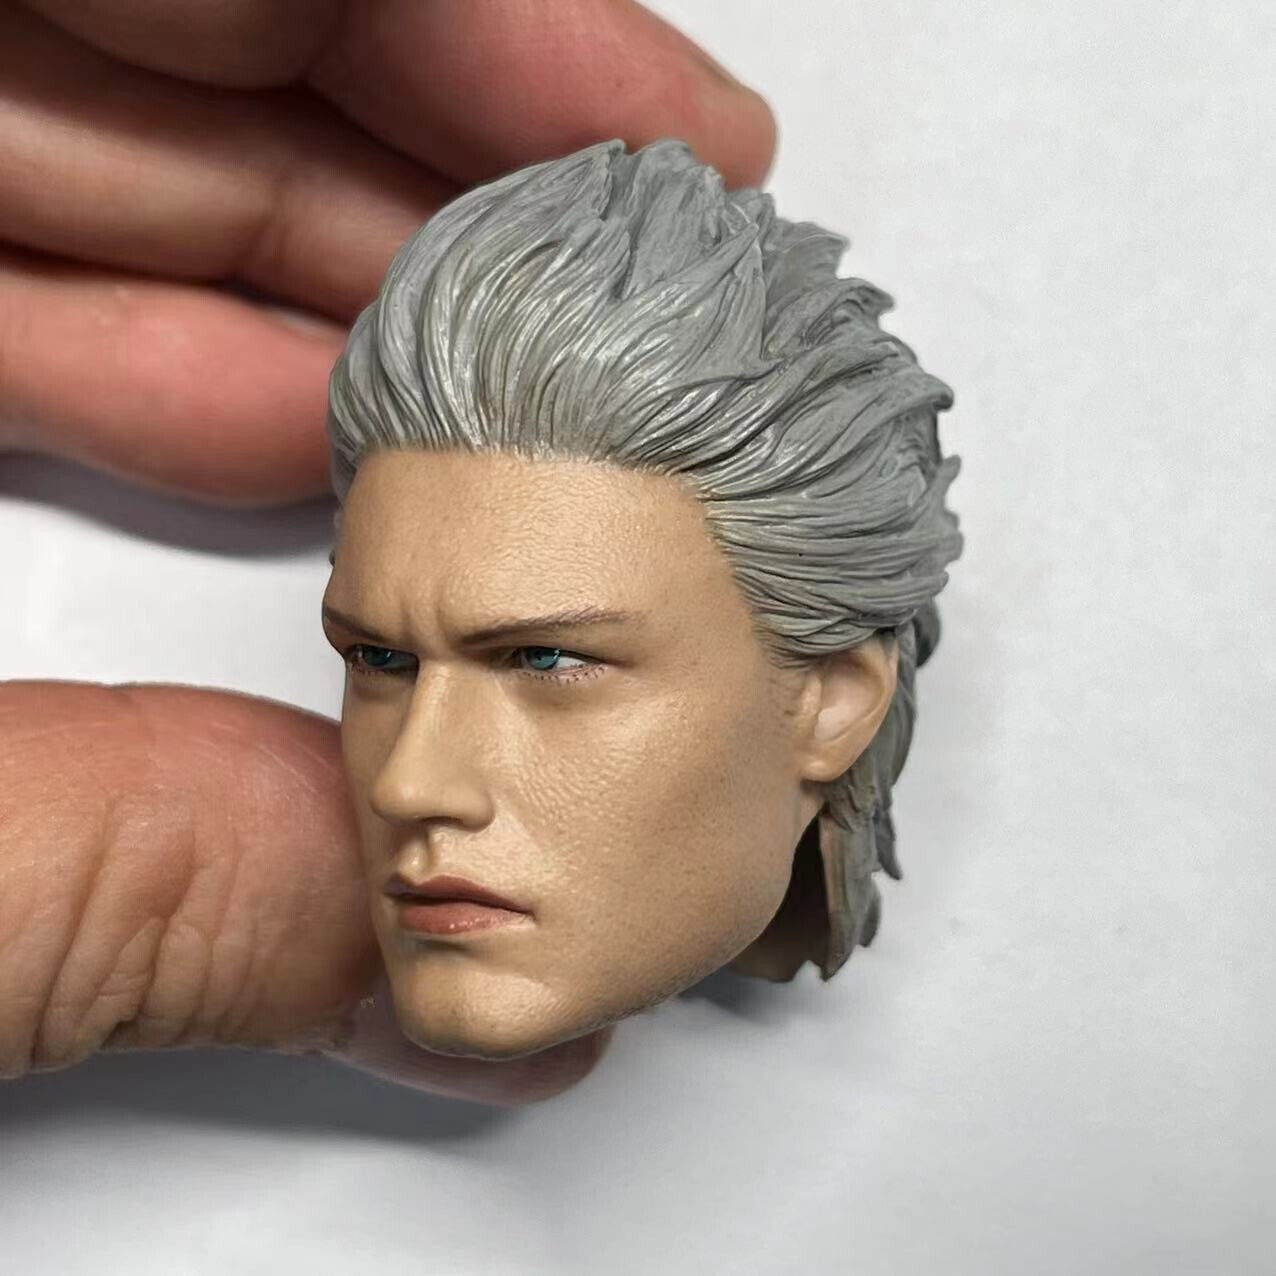 1:6 Male Hunter Vergil Head Sculpt Model For 12\'\' Male Action Figure Body Toy